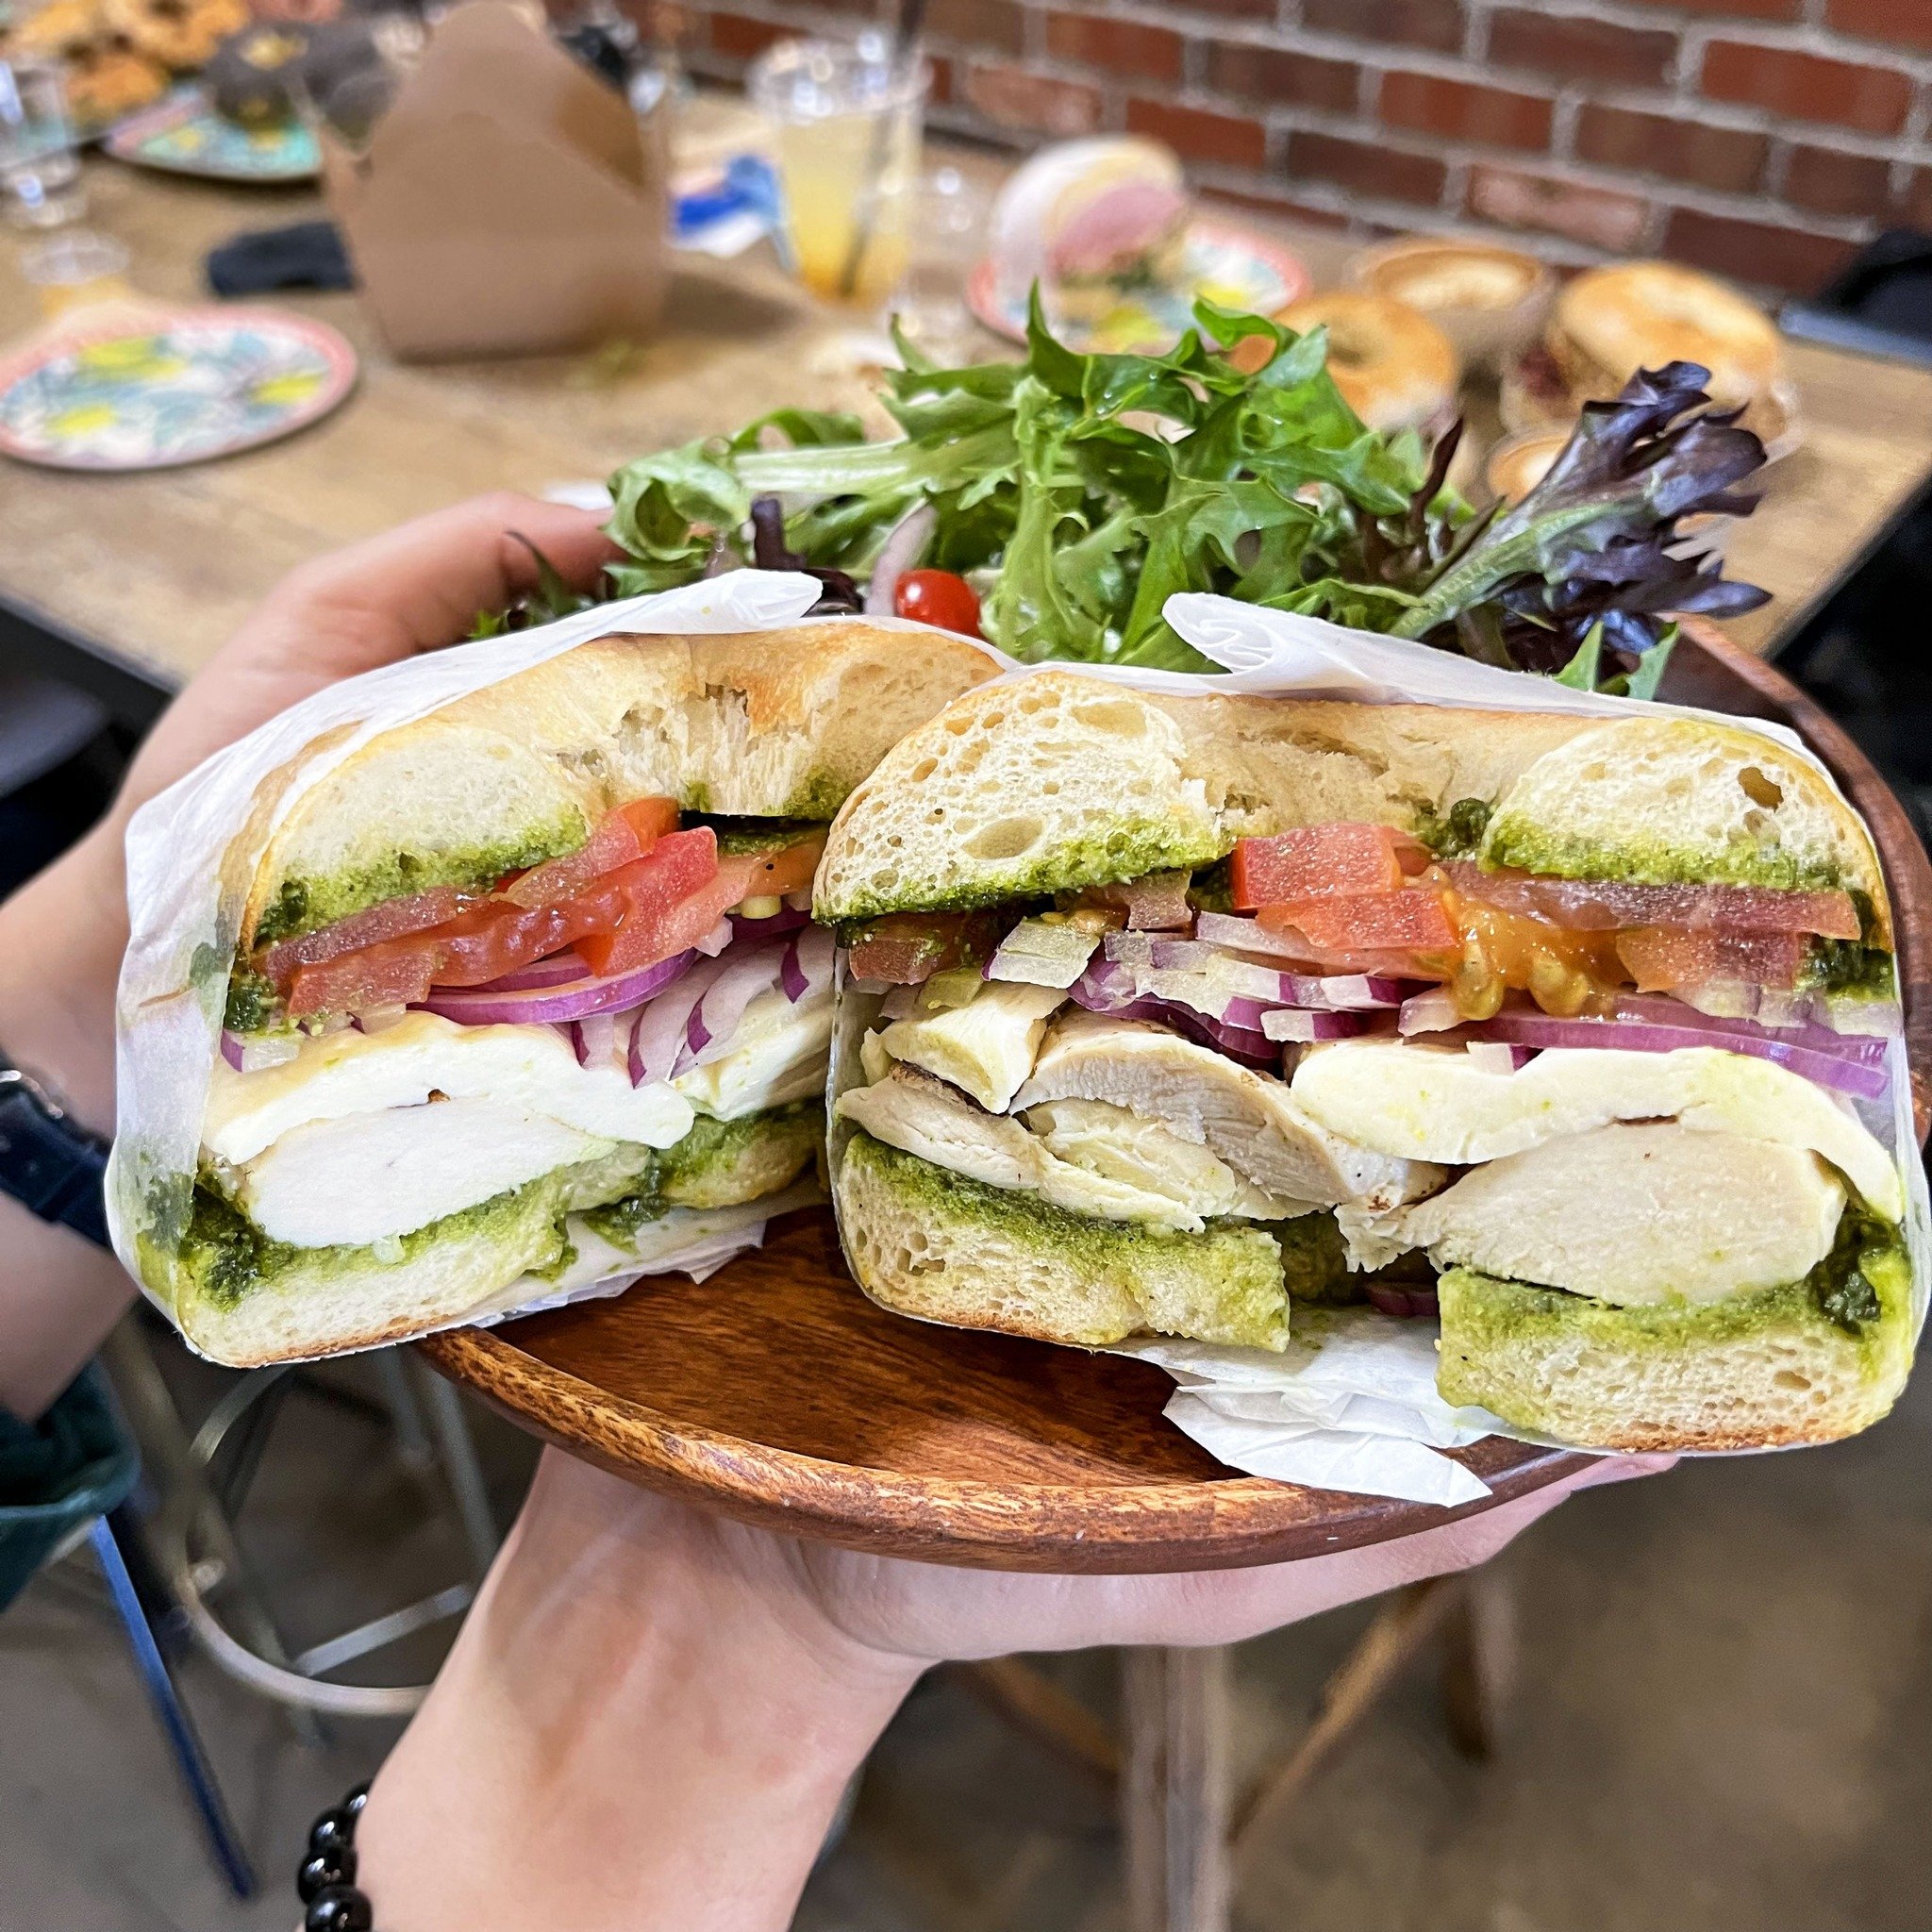 🥯🥪👋New week, new Bagel Sandwich! Say hello to our Chicken Basil Pesto Bagel Sandwich! Enjoy rich and delightful flavors in every bite! 👀✨

👀✨Looking for a different flavor? We got you! A total of FIVE bagel sandwiches are here for all of your cr